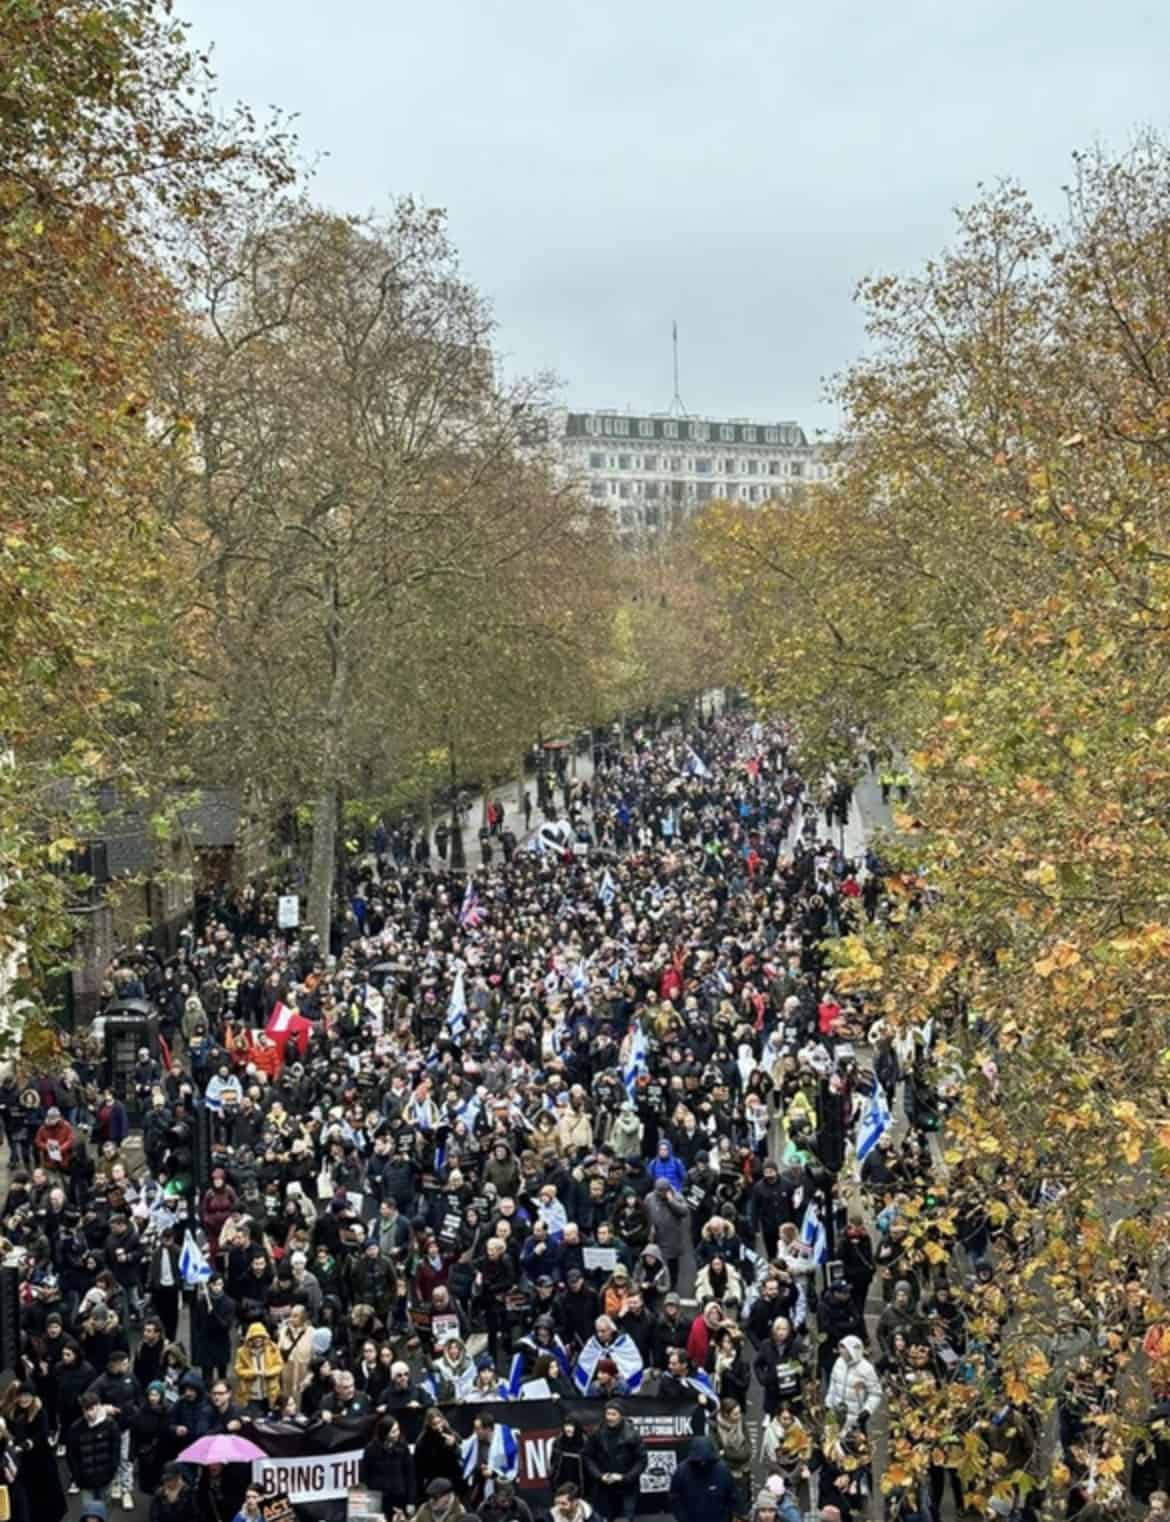 “March Against Antisemitism” in London